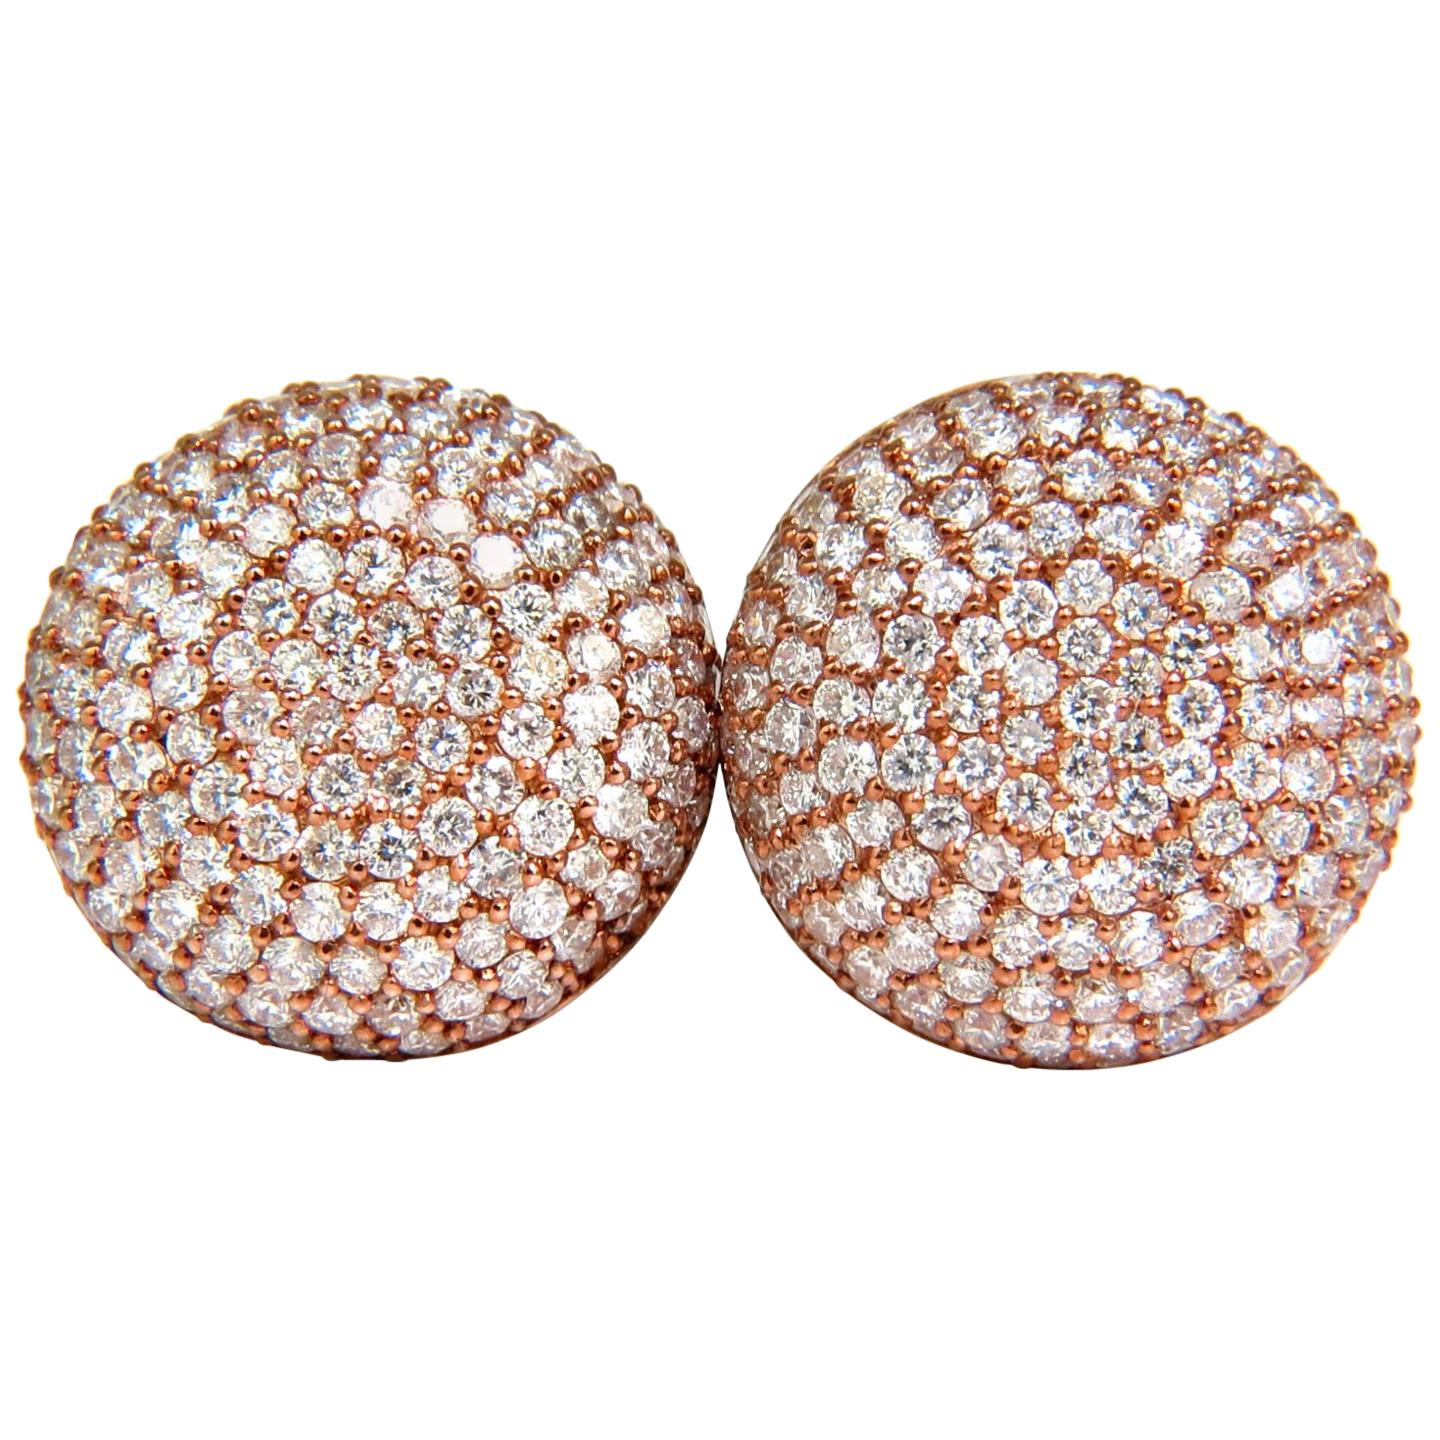 5.50 Carat Diamonds Cluster Domed Bead Set Button Puffed Clip Earrings G/VS